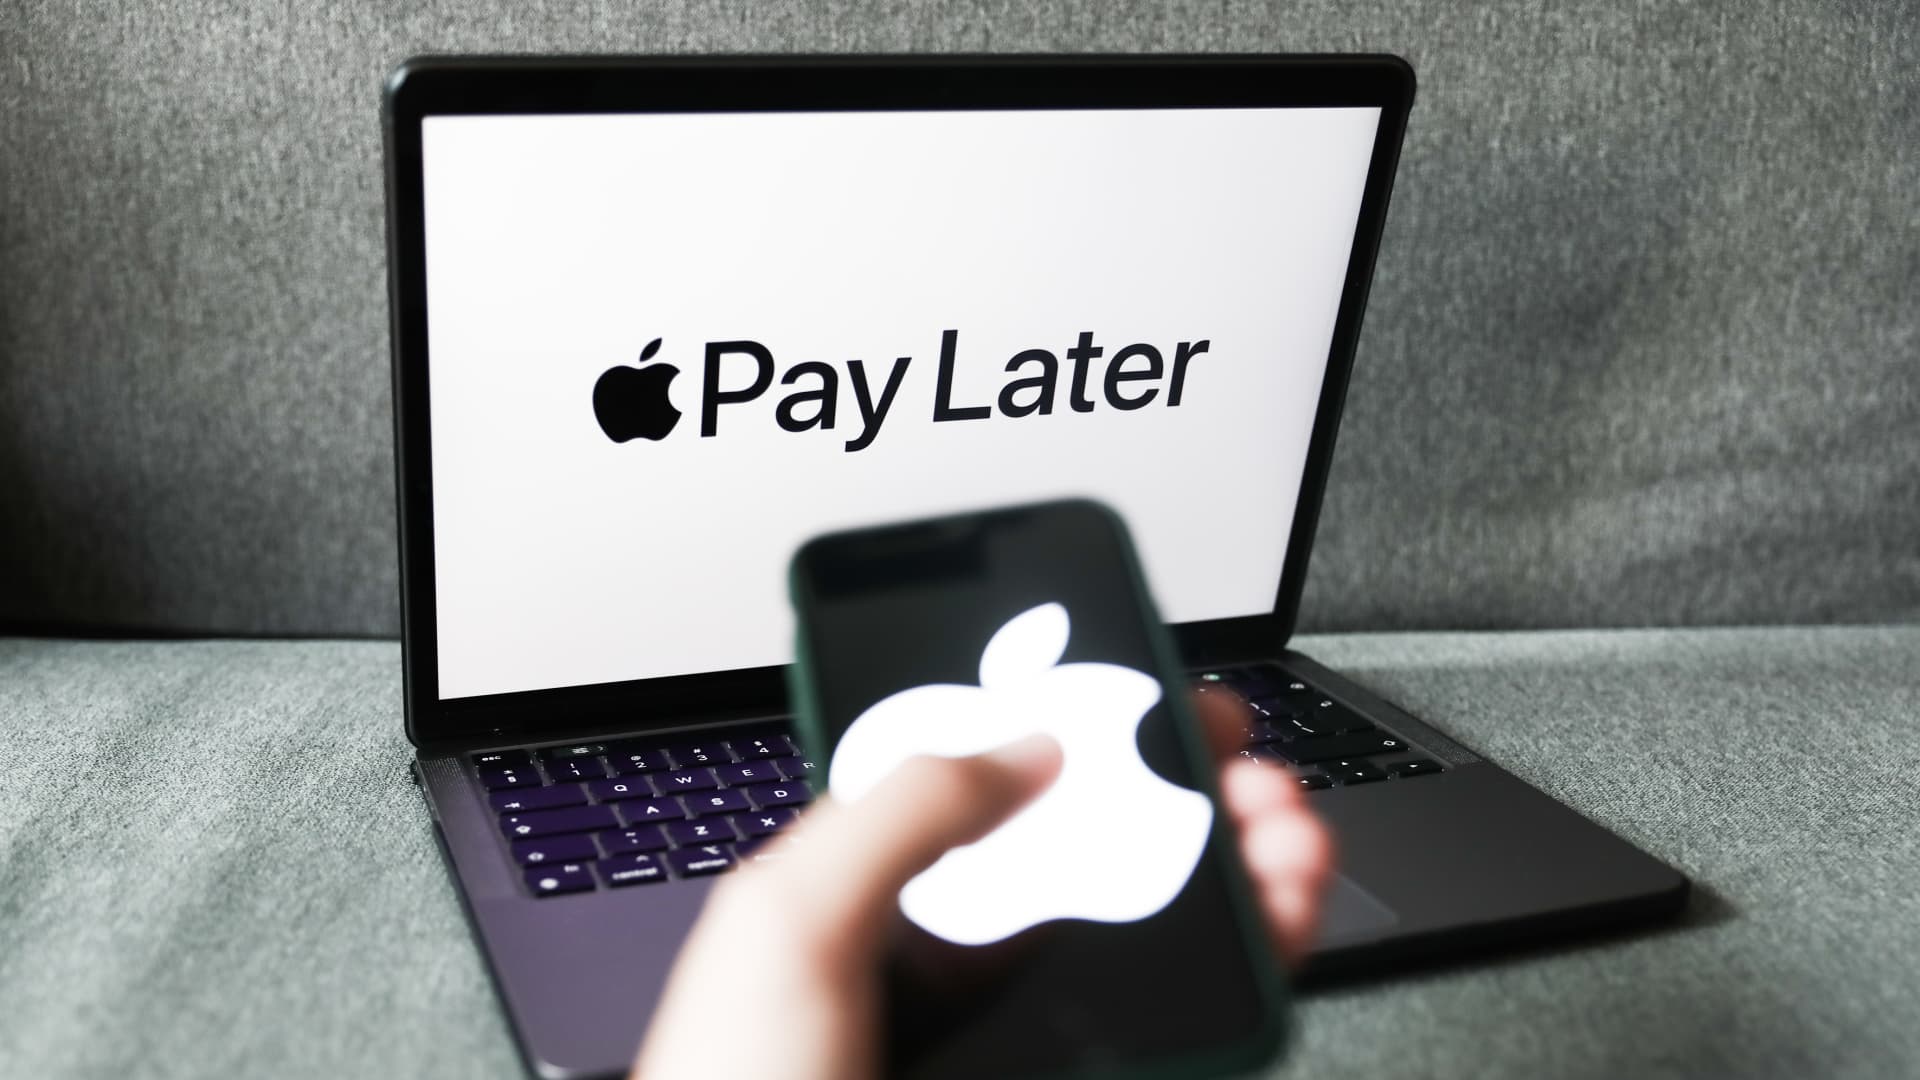 ‘Buy now, pay later’ firms were already in trouble. Apple just gave them one more thing to worry about